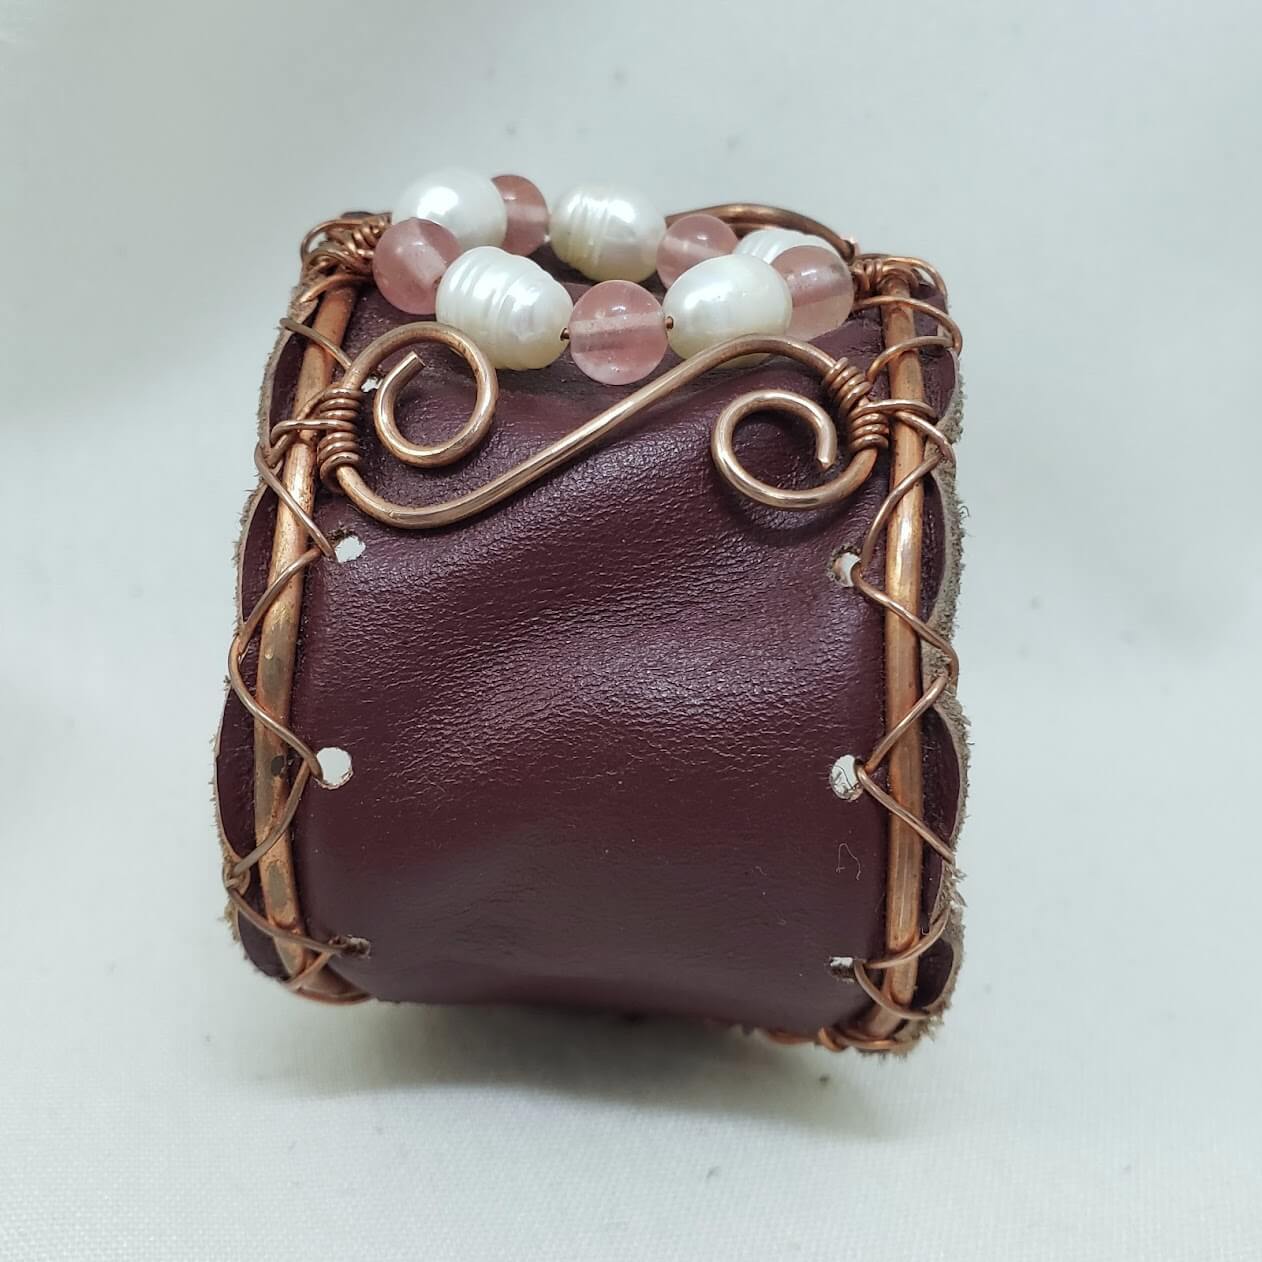 Copper and Leather Cuff Cherry Quartz and Pearl - Mother Of Metal - cherry quartz - For Her - For Wrists-Bracelets